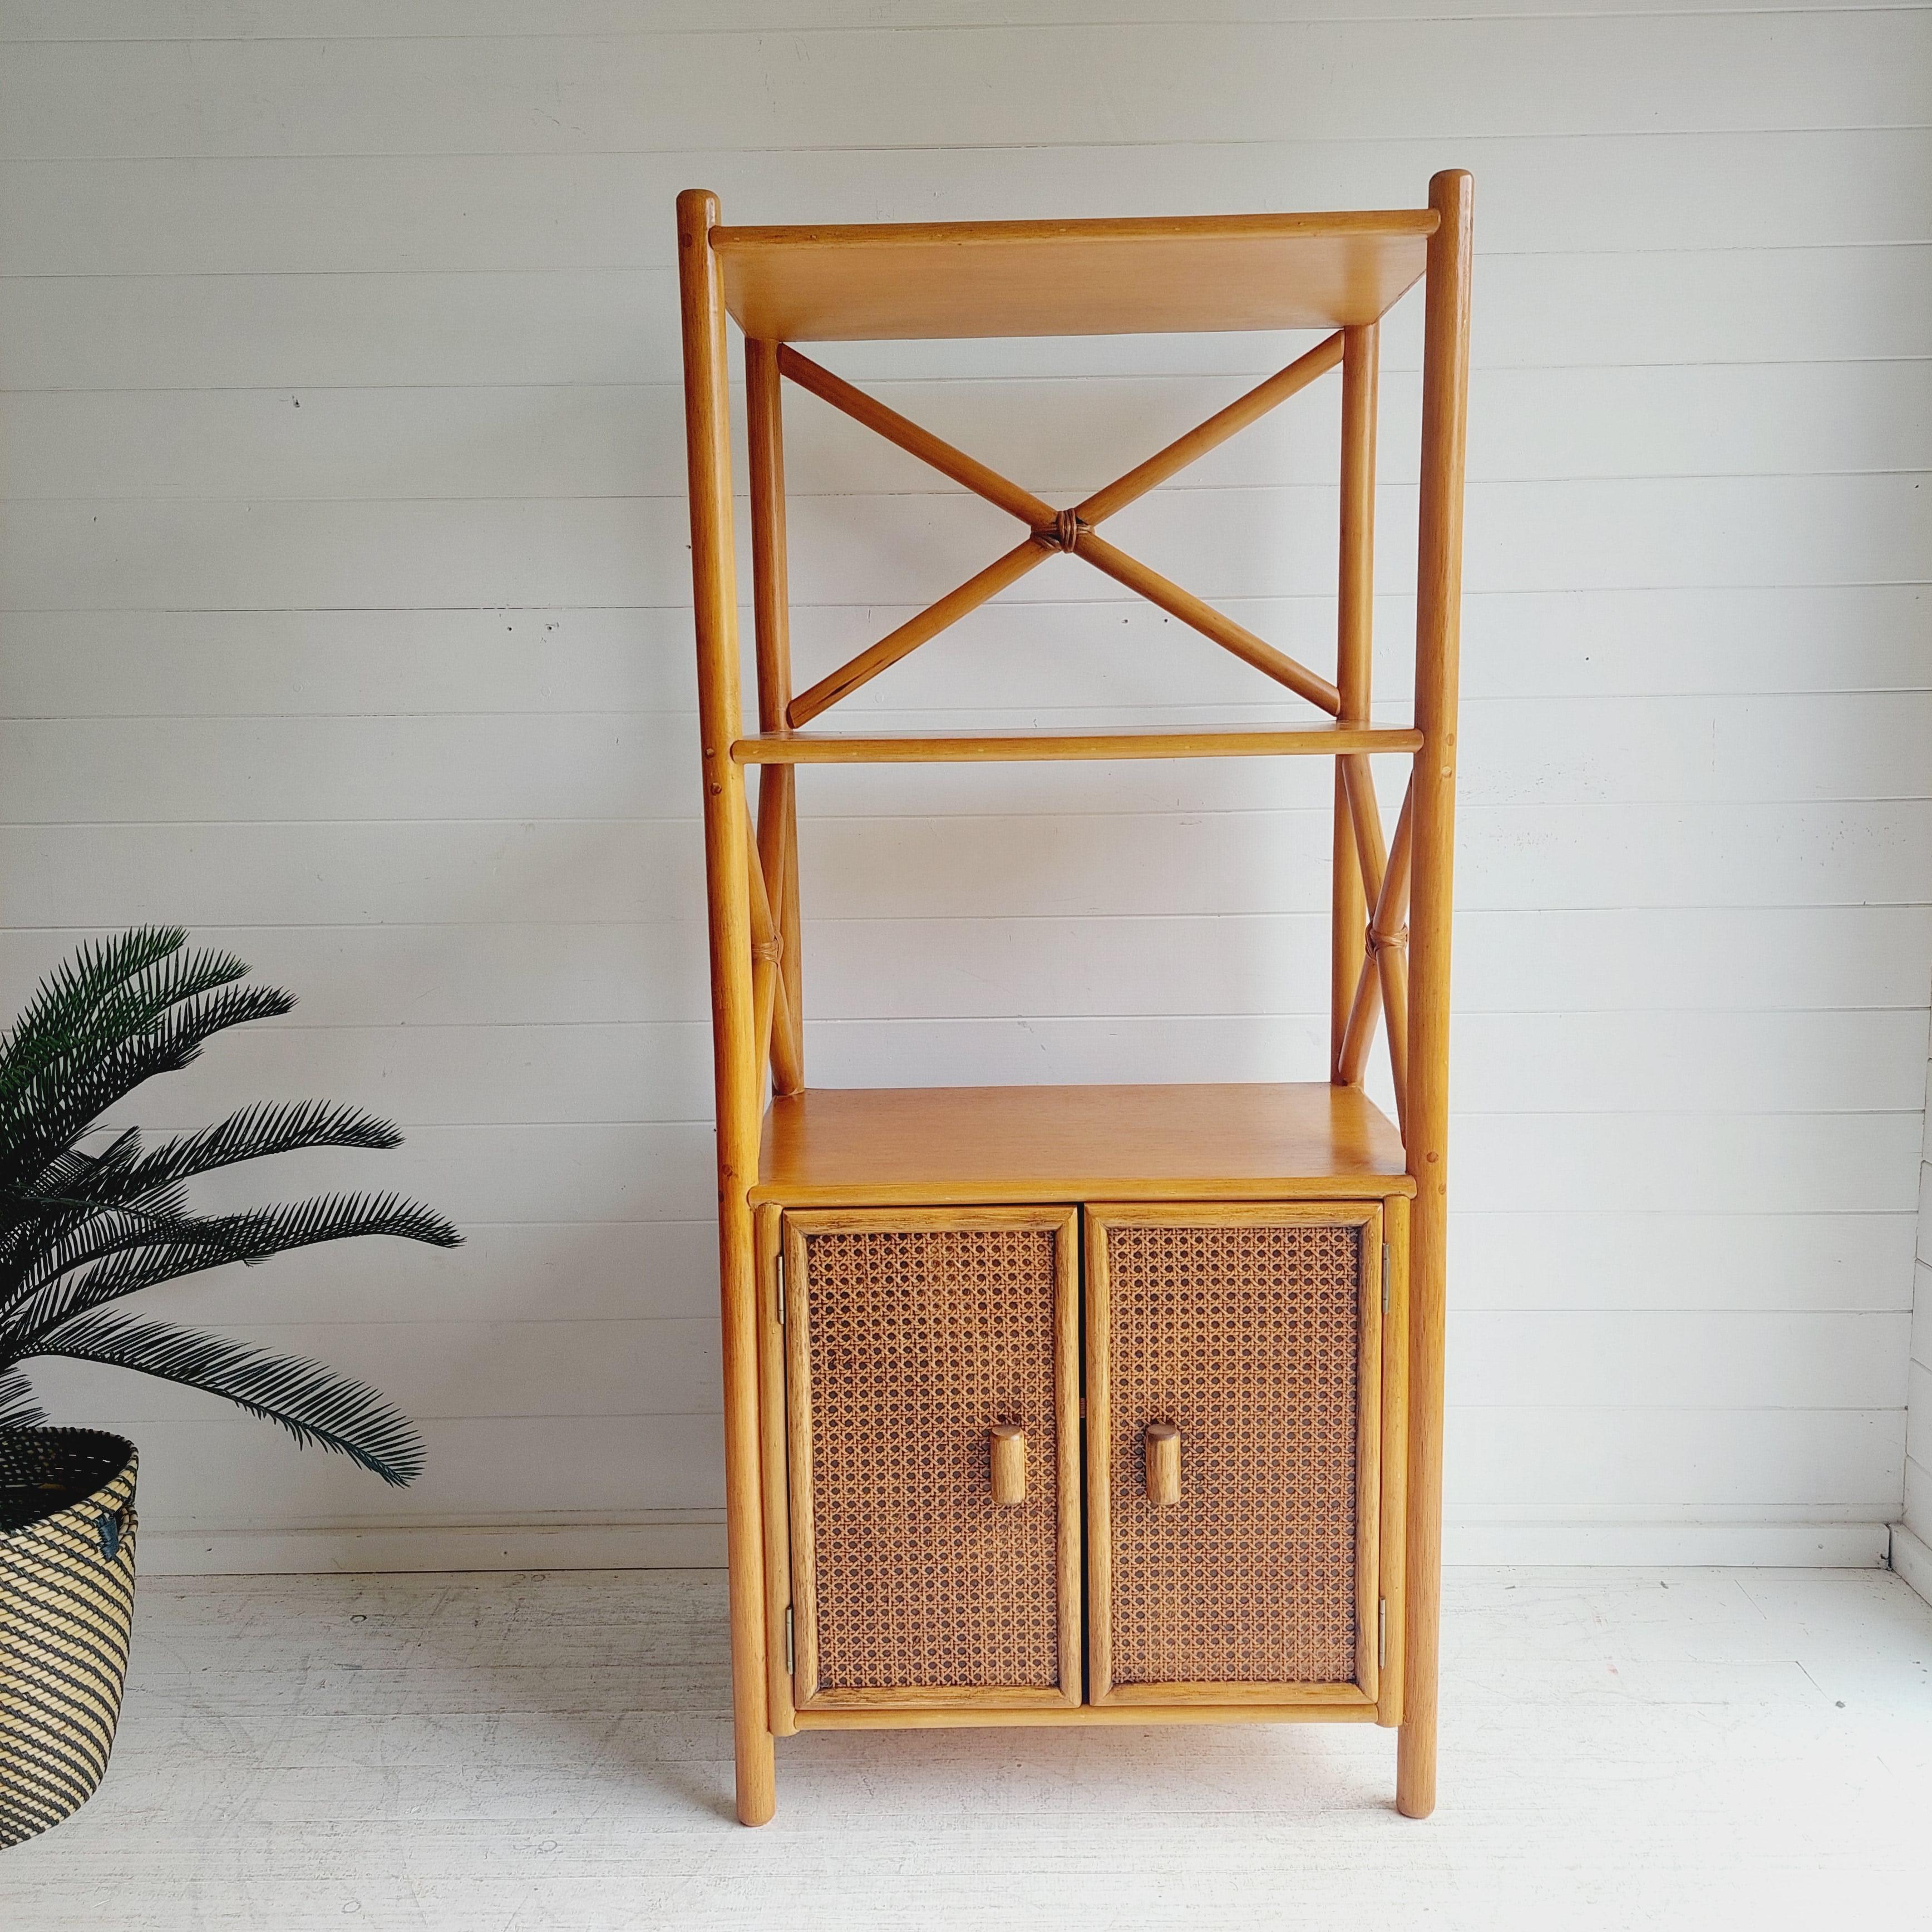 A beautifully designed & crafted, tall storage shelving Unit.
Manufactured by Angraves.
Circa 1970/80s
Made in Uk
Made of Bamboo, rattan and cane.

The unit includes a good sized cupboard to the lower section with internal adjustable shelf. 
3 fixed